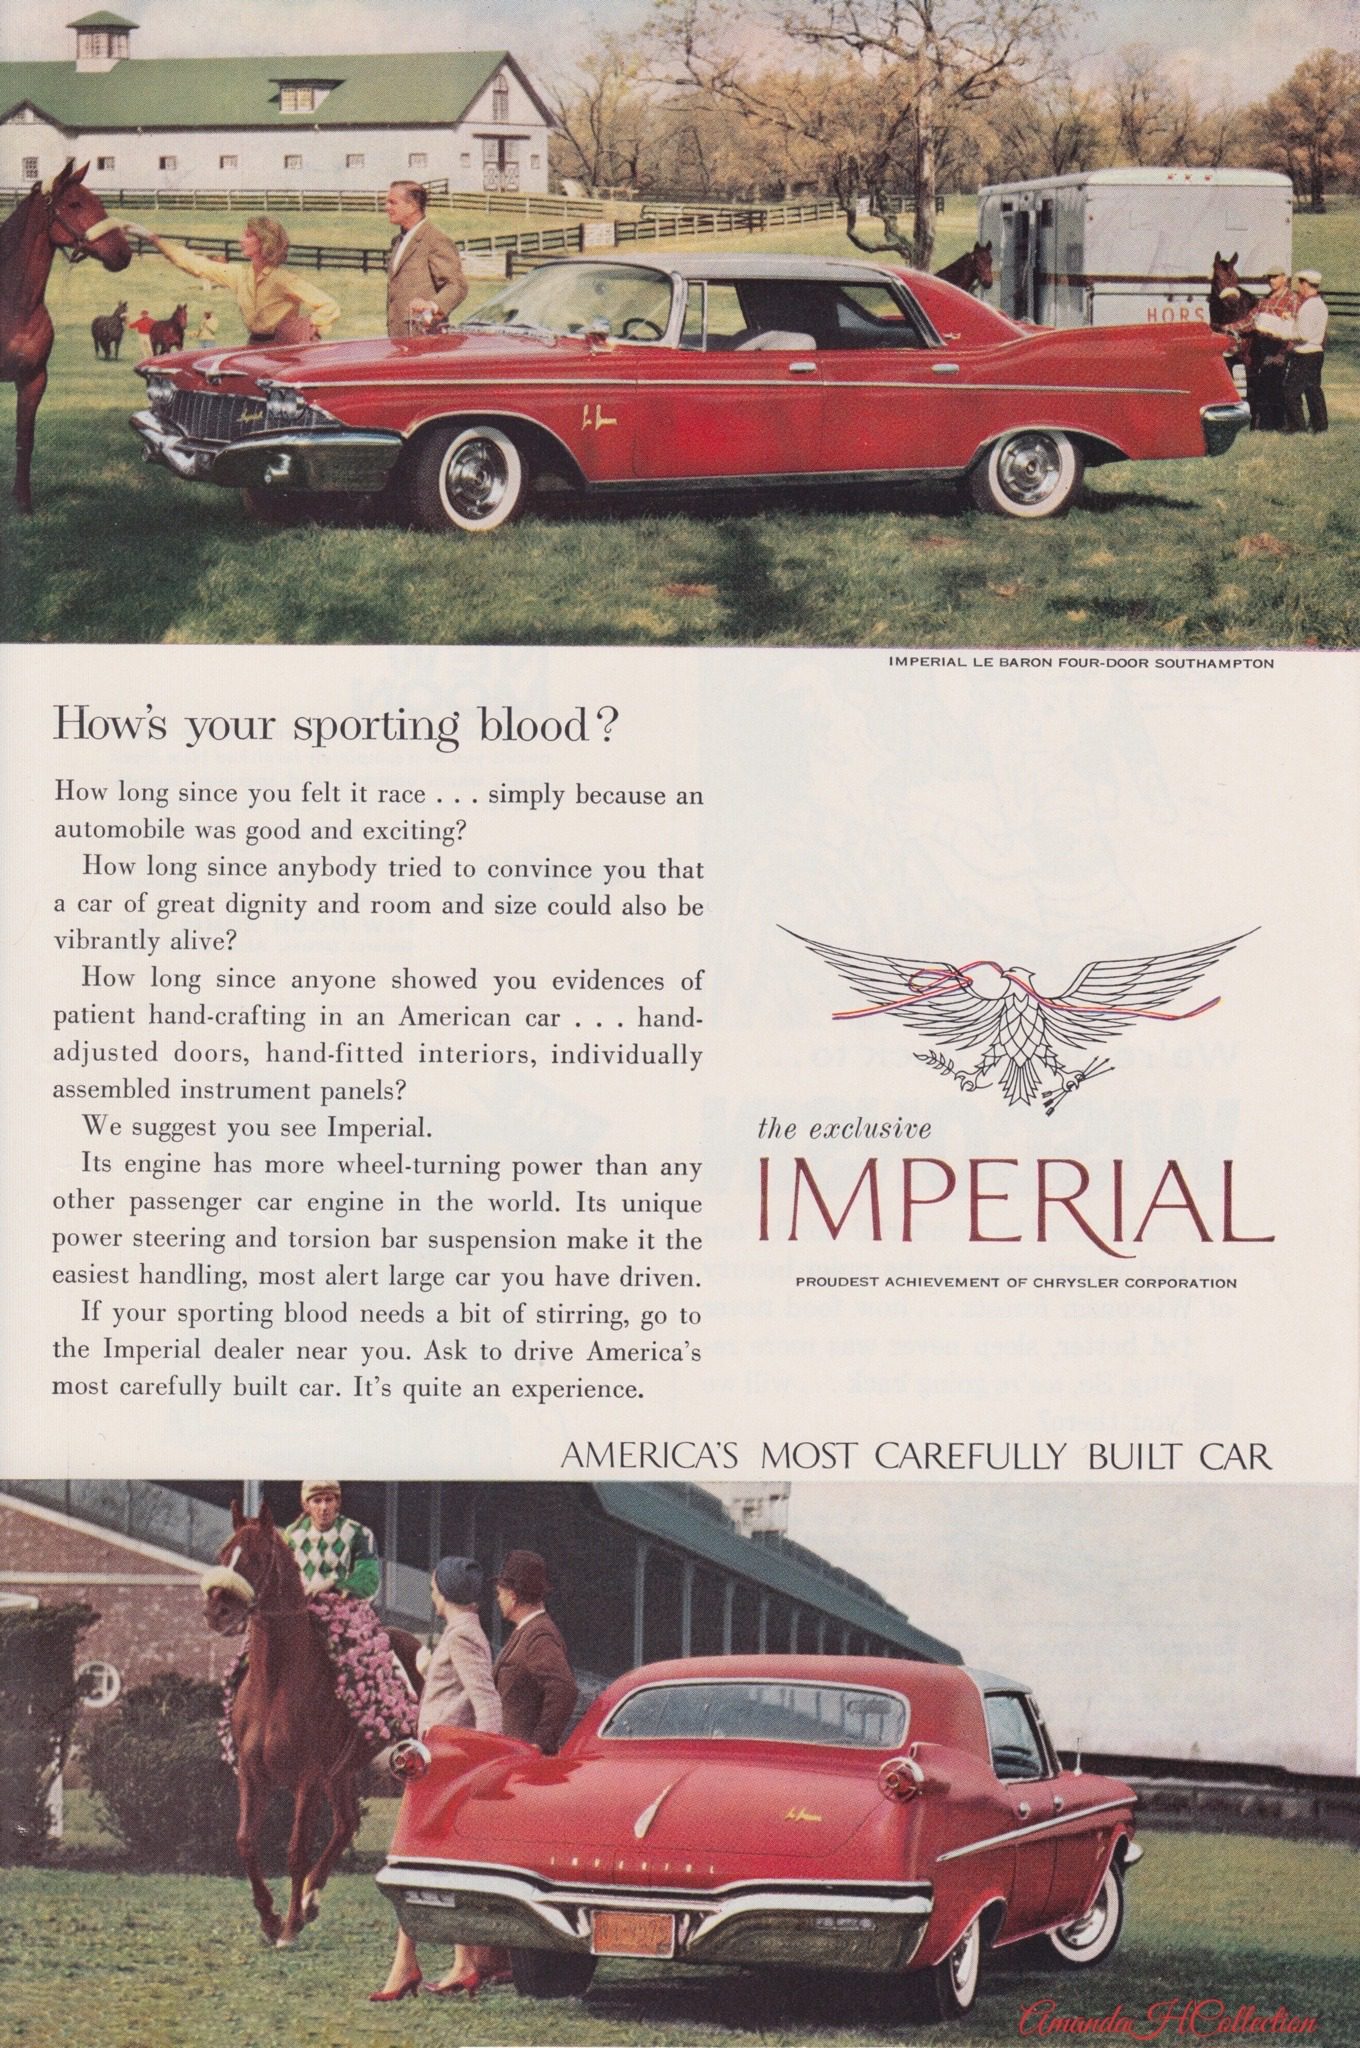 1960 advertisement for Imperial by Chrysler.